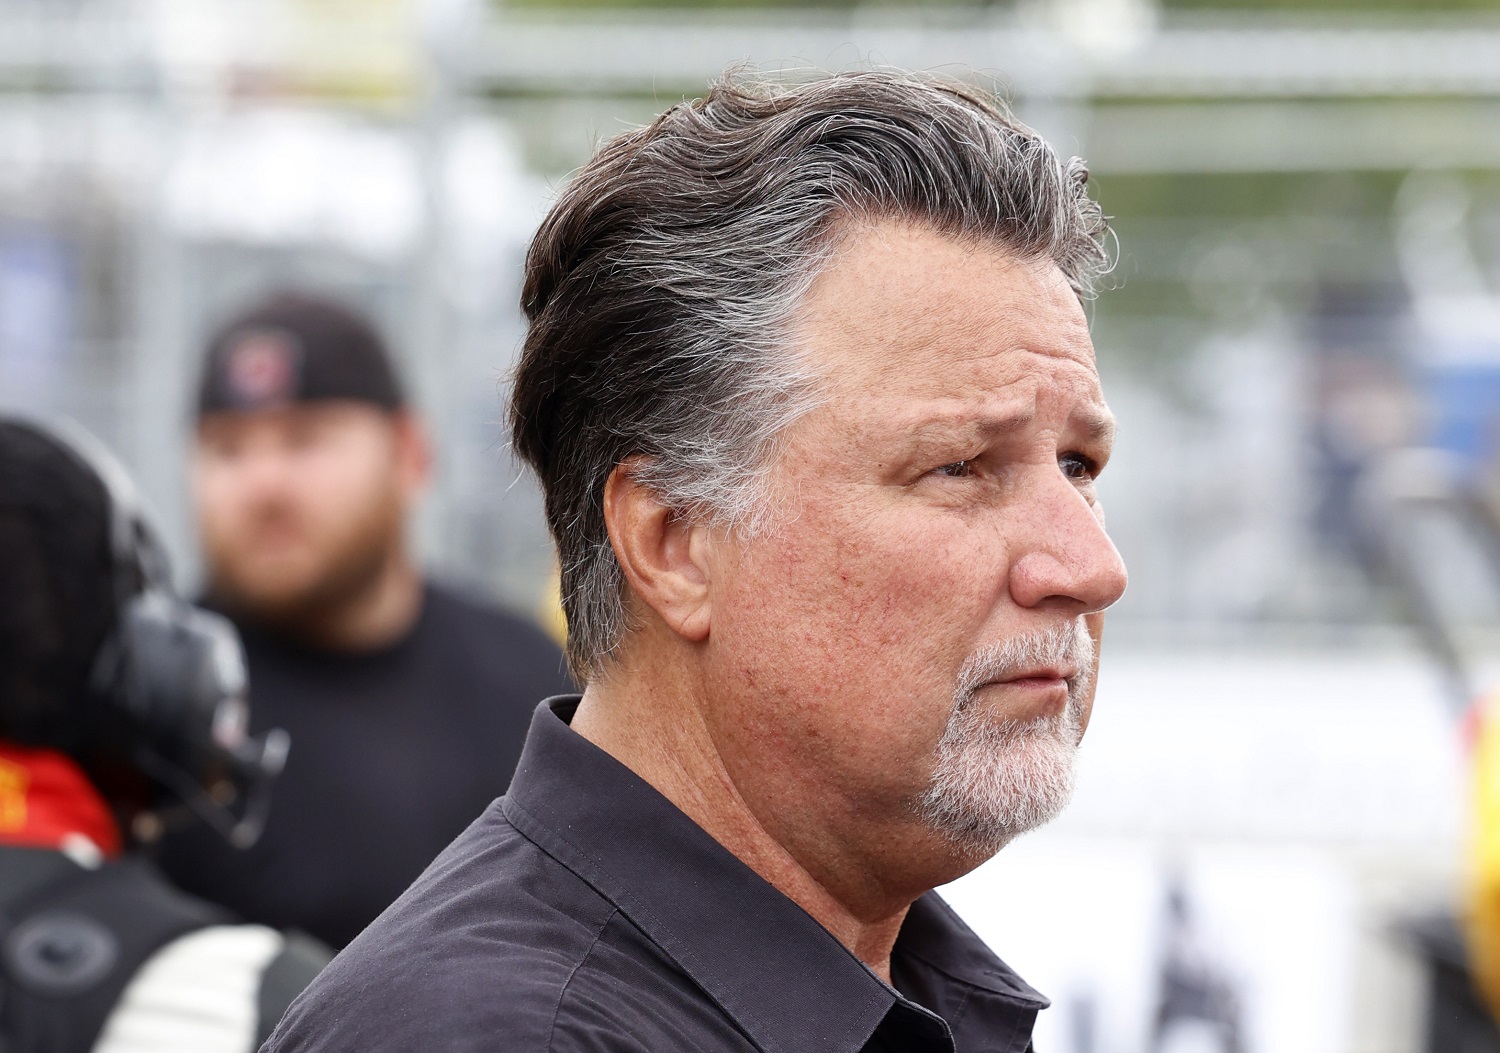 IndyCar series car owner Michael Andretti waits in the pits for the start of the Big Machine Music City Grand Prix on Aug. 7, 2022. | Brian Spurlock/Icon Sportswire via Getty Images